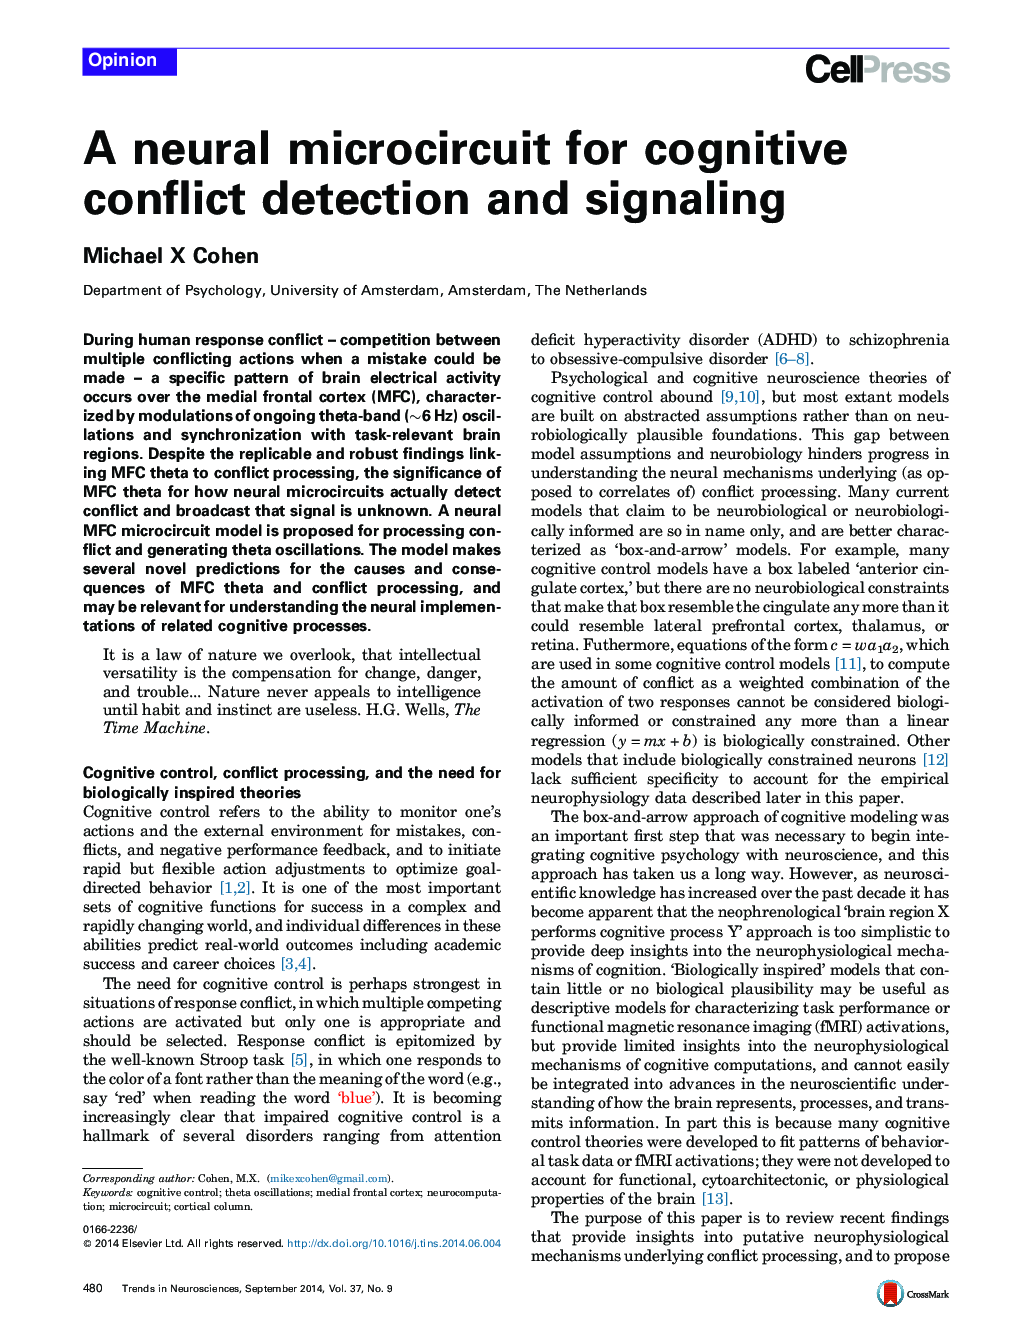 A neural microcircuit for cognitive conflict detection and signaling